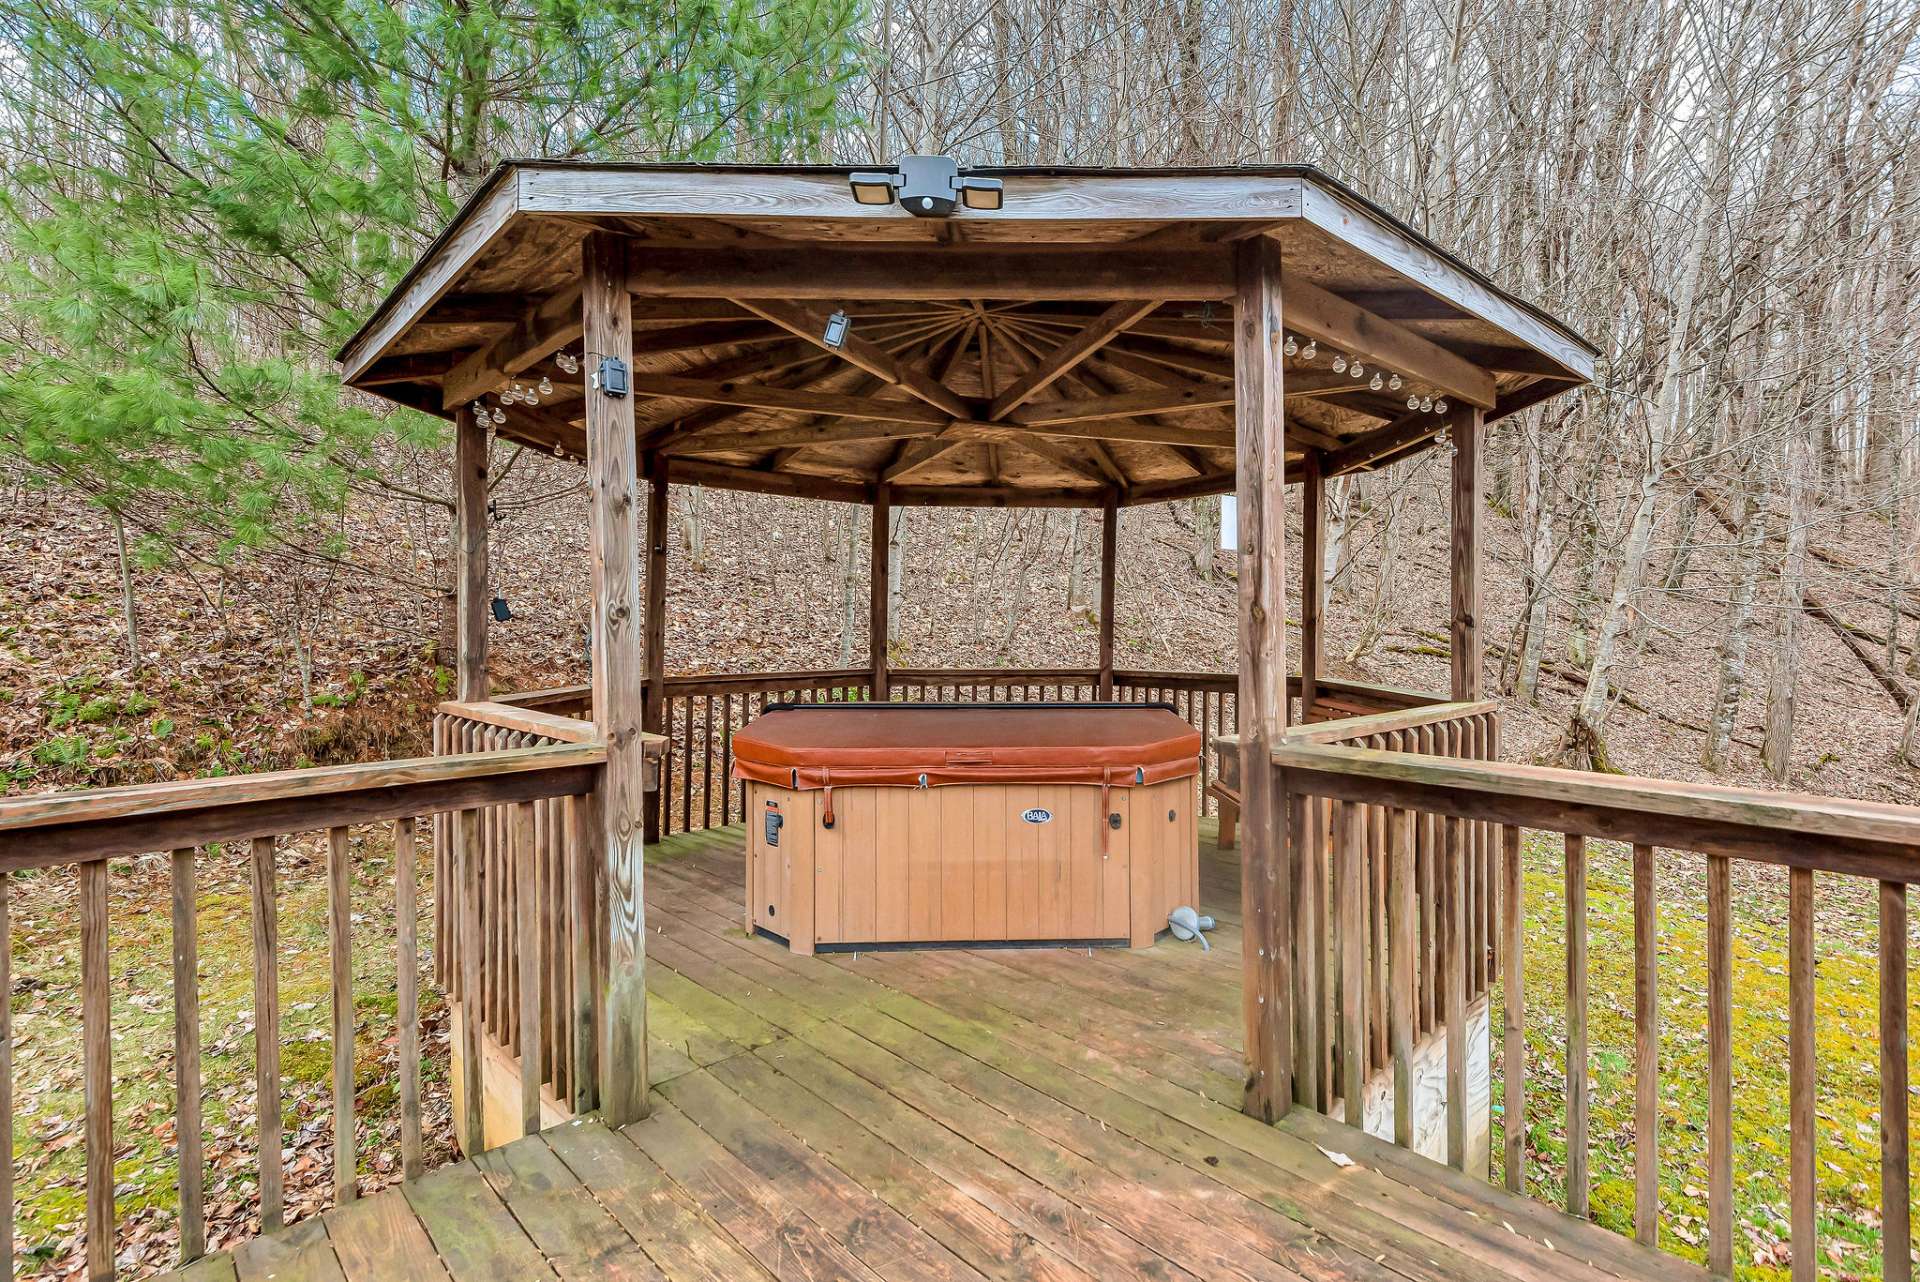 Enjoy a little bubbly in the bubbling hot tub nestled under the sheltering embrace of the back gazebo.